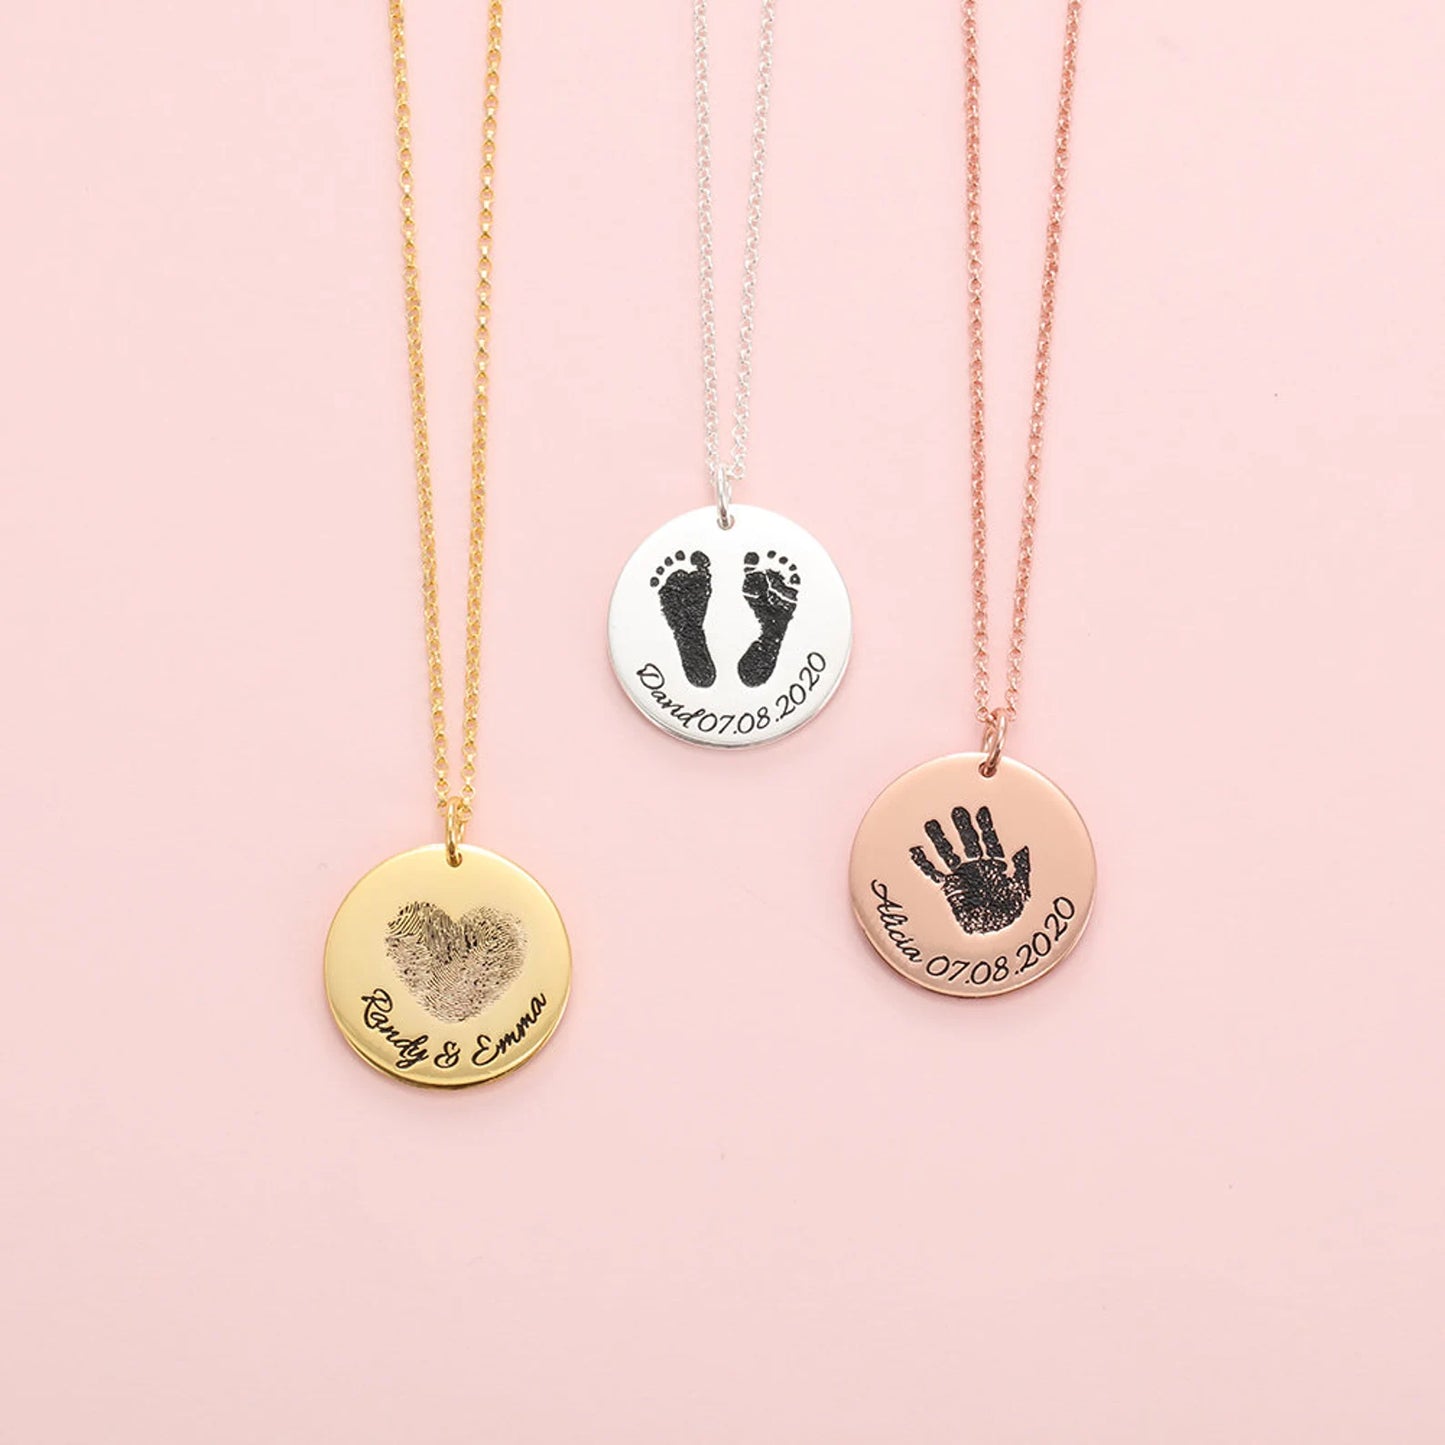 Custom Fingerprint/Paw Print Round Disc Necklace: Engraved Text and Personalized Imprint in 925 Sterling Silver